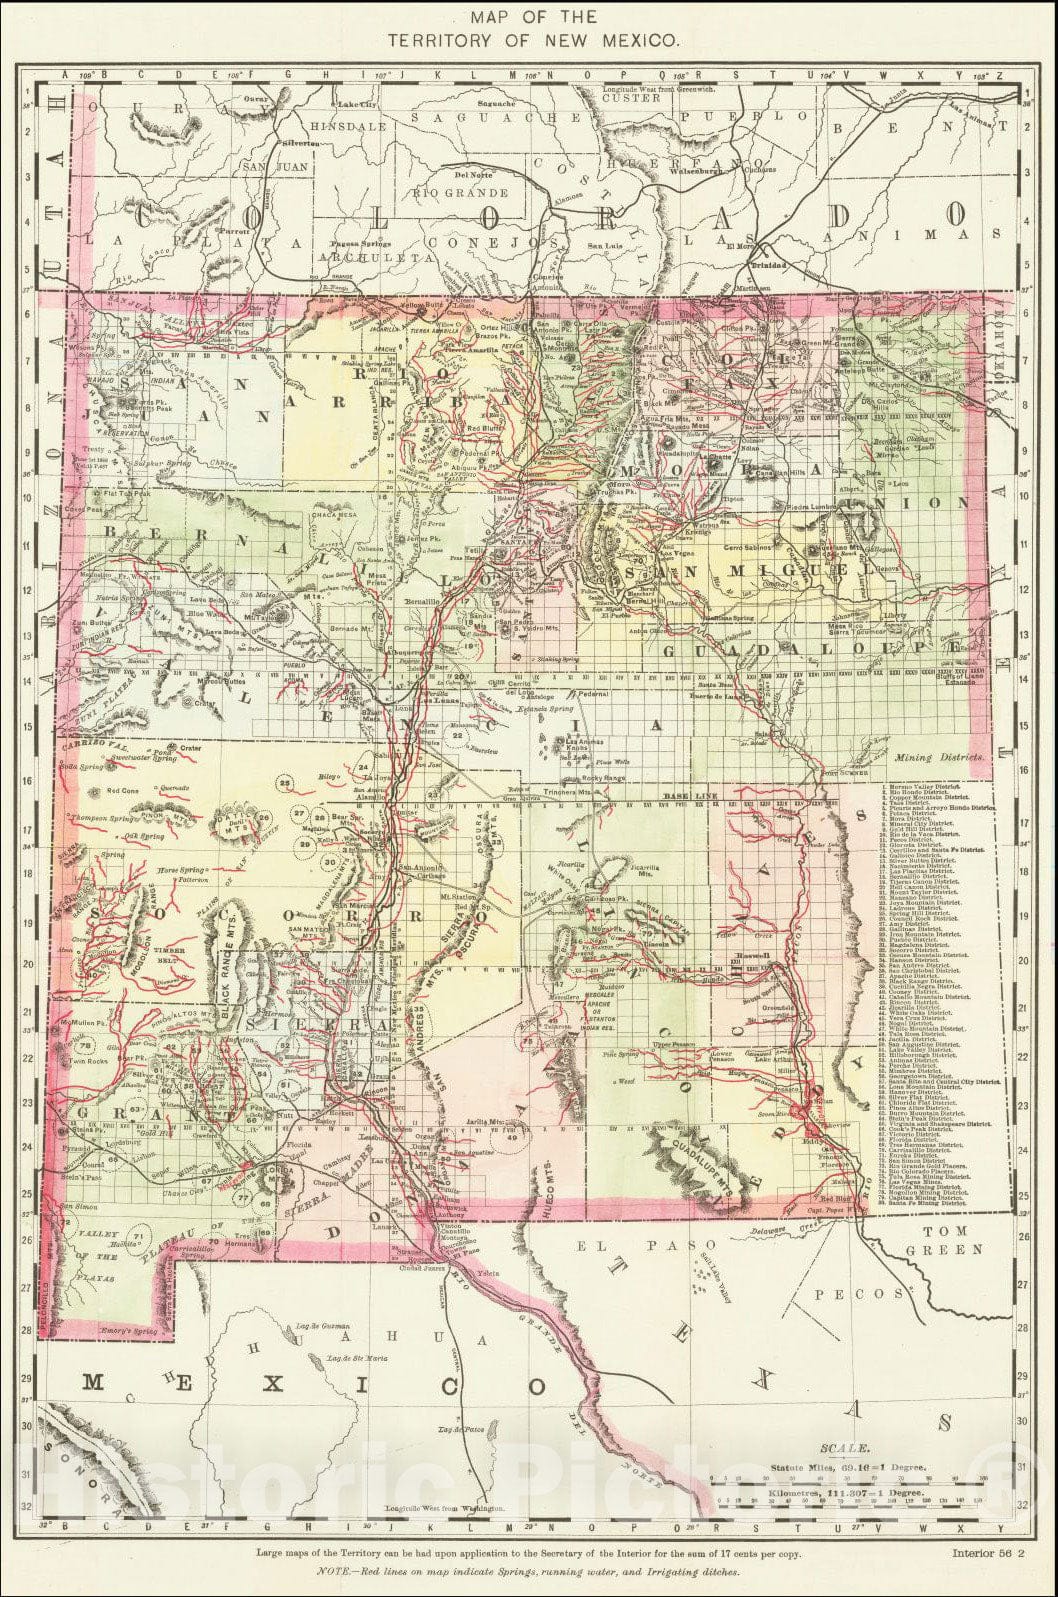 Historic Map : Map of the Territory of New Mexico, 1894, United States Department of the Interior, Vintage Wall Art